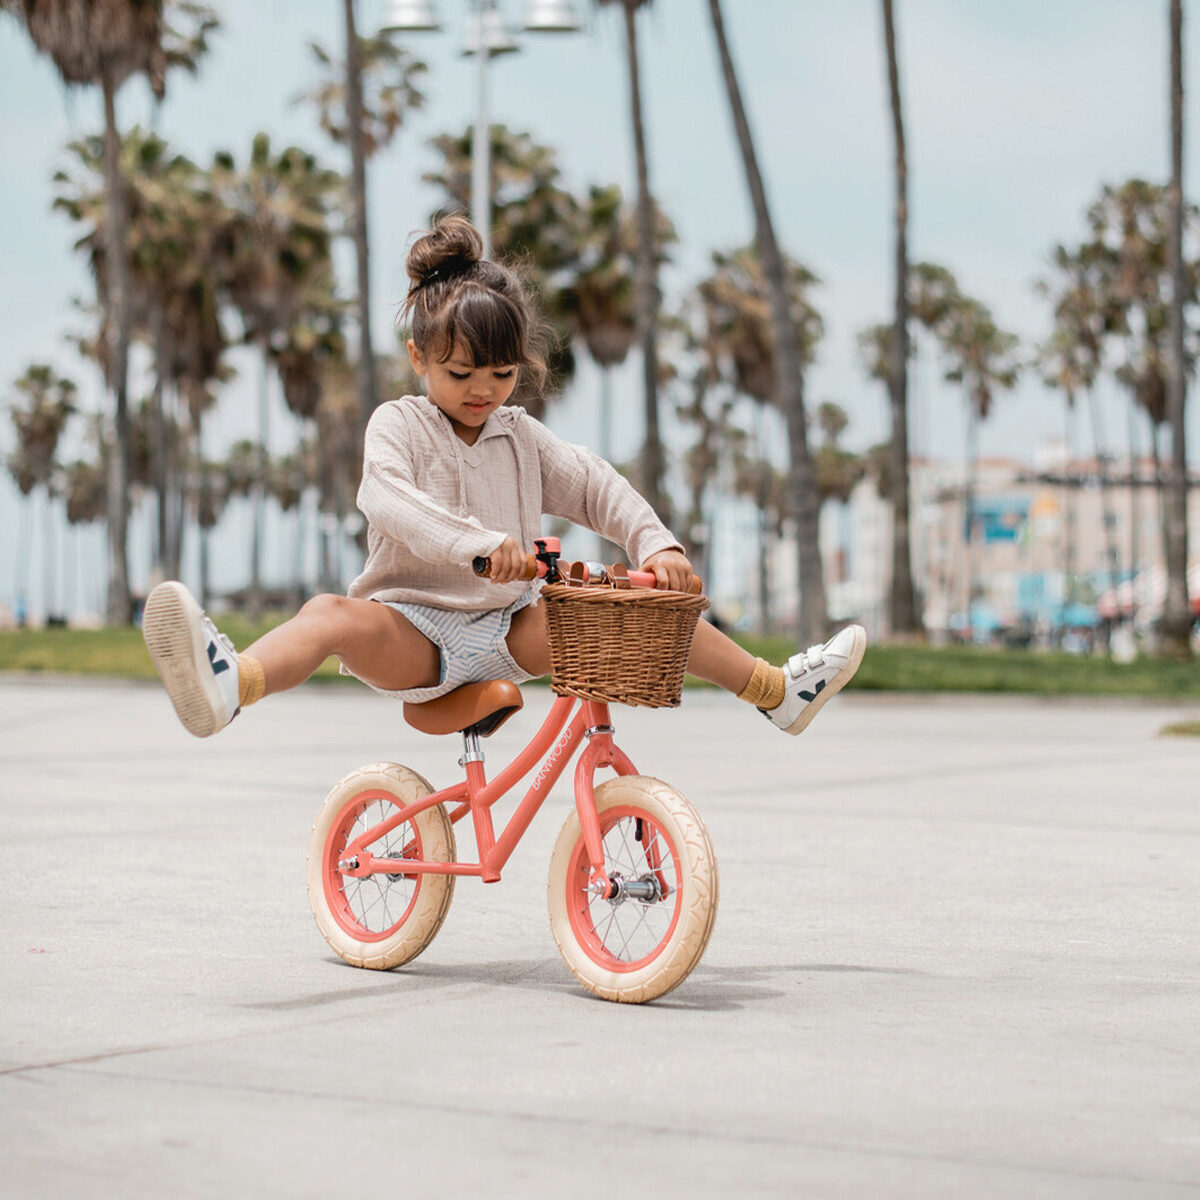 A little girl riding a balance bike with palm trees in the background